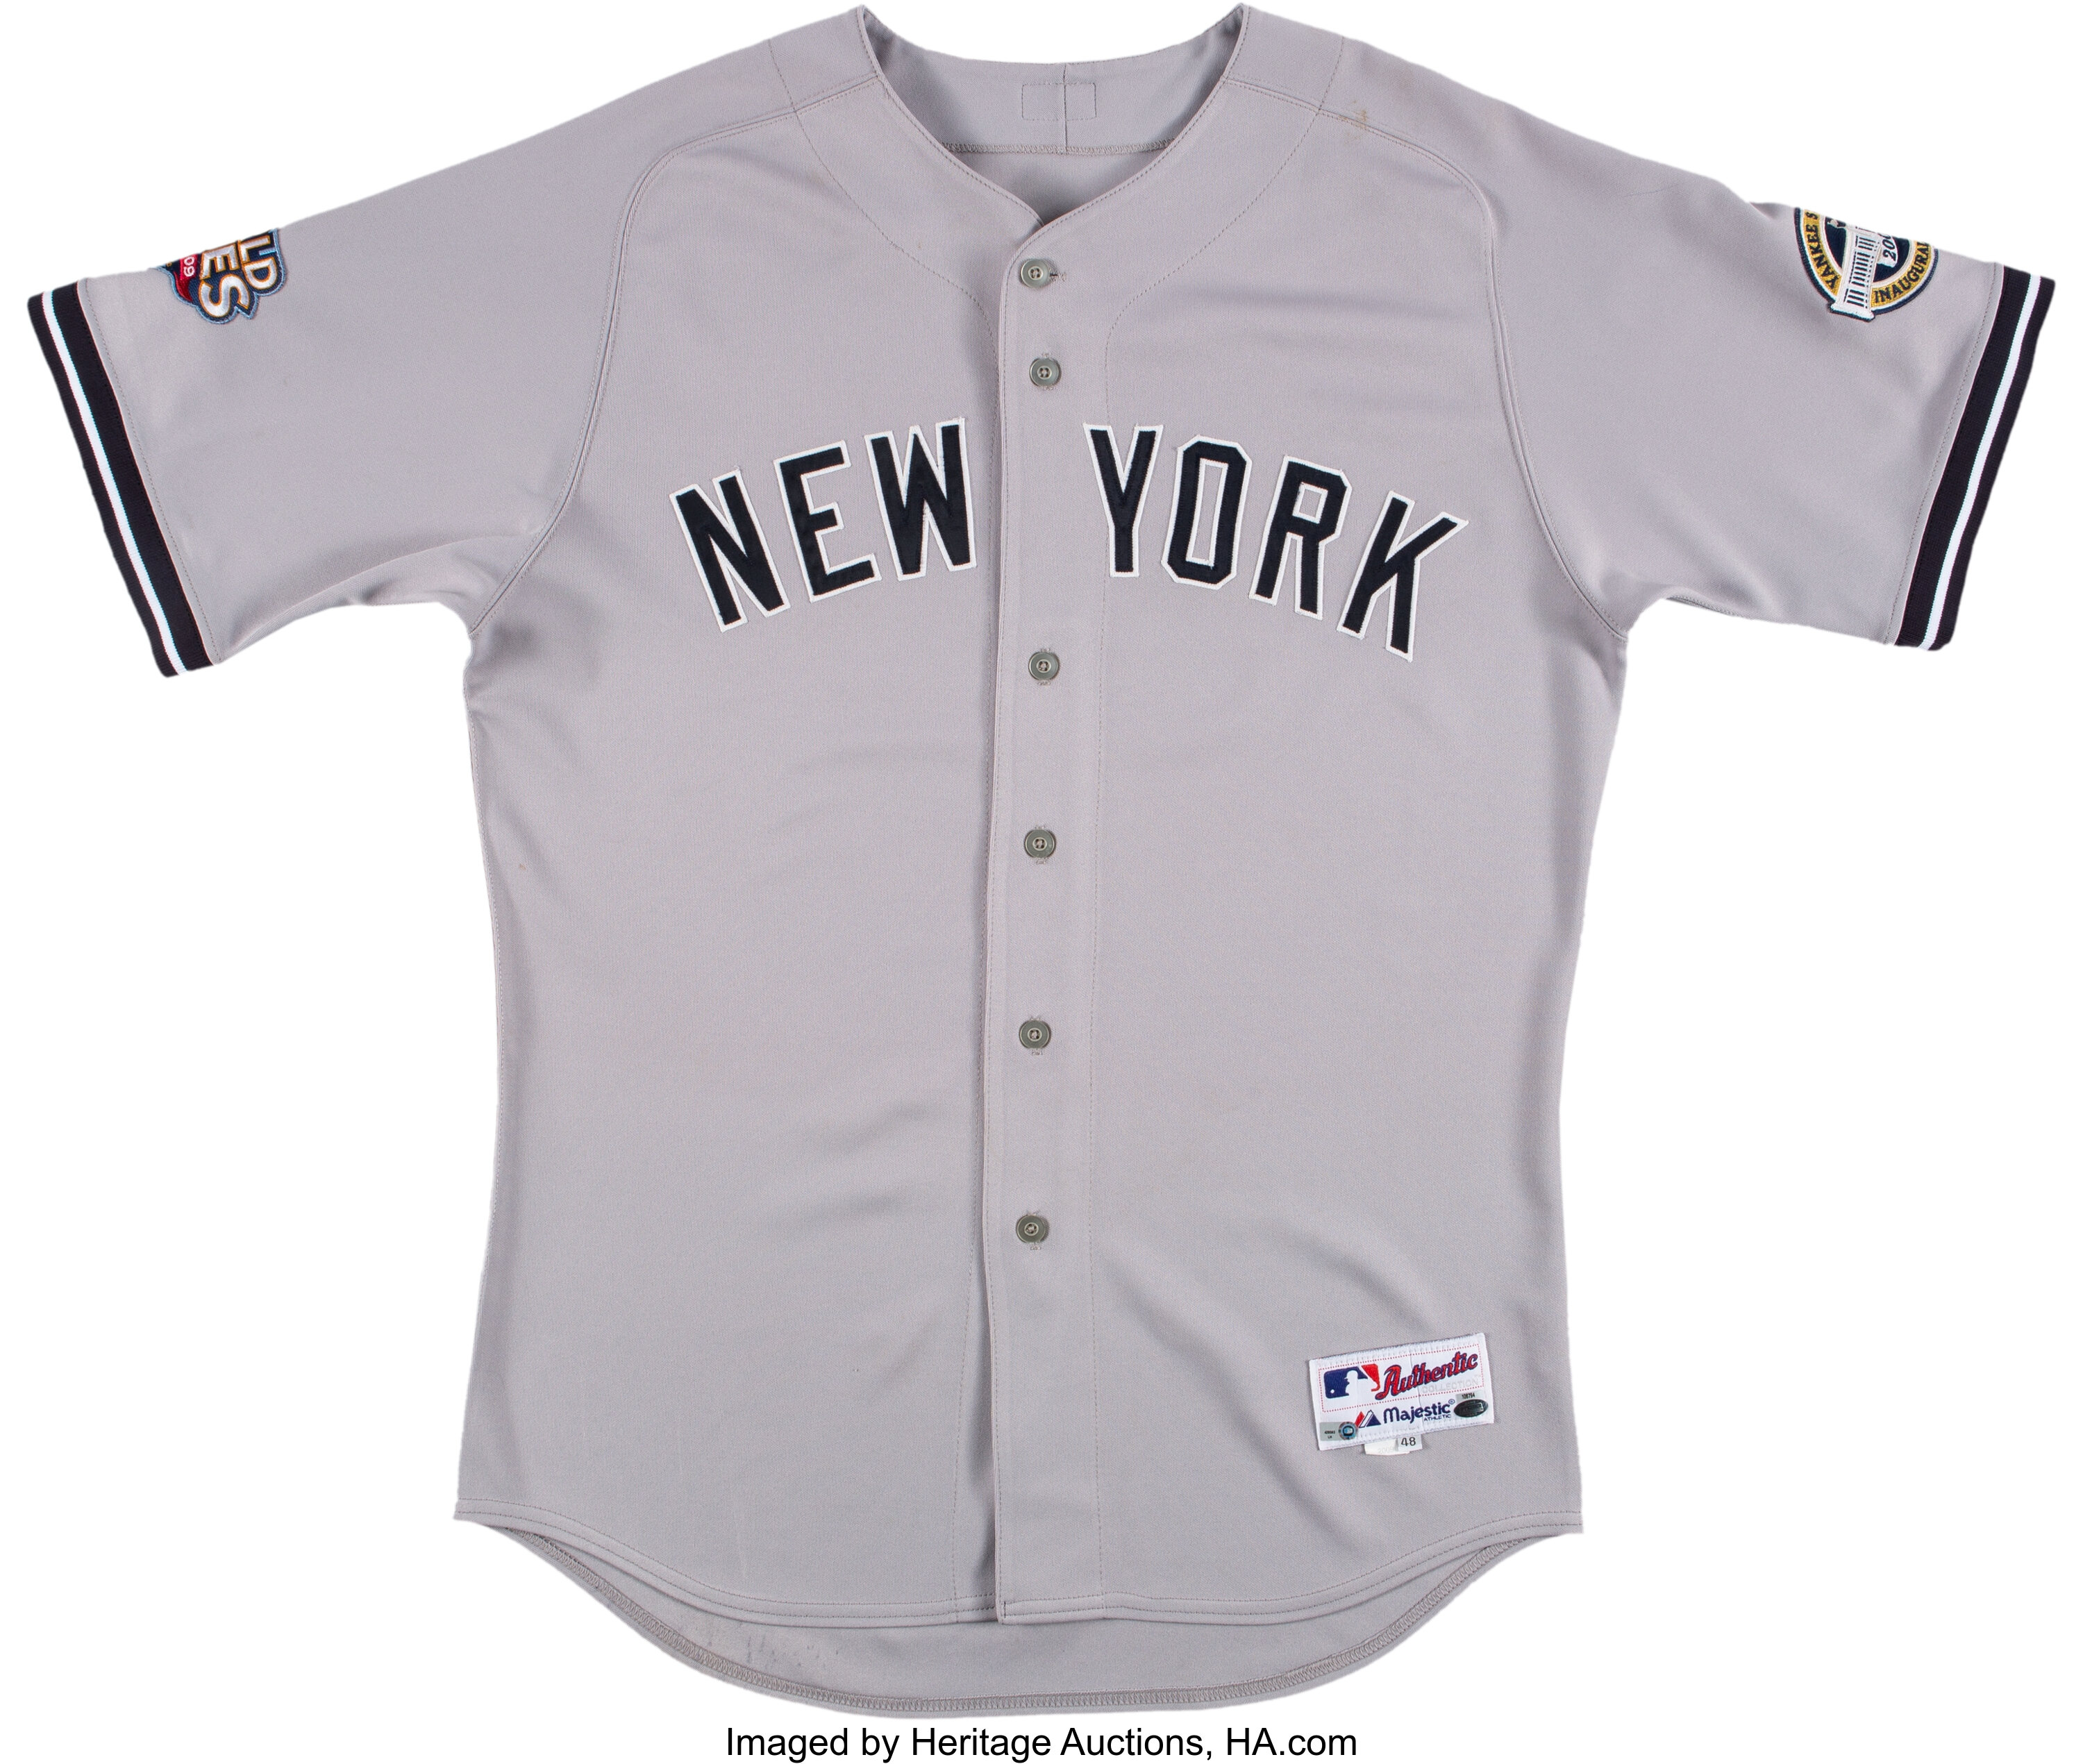 2009 World Series Yankees Authentic Home Jersey Customized with both  Patches and Numbers